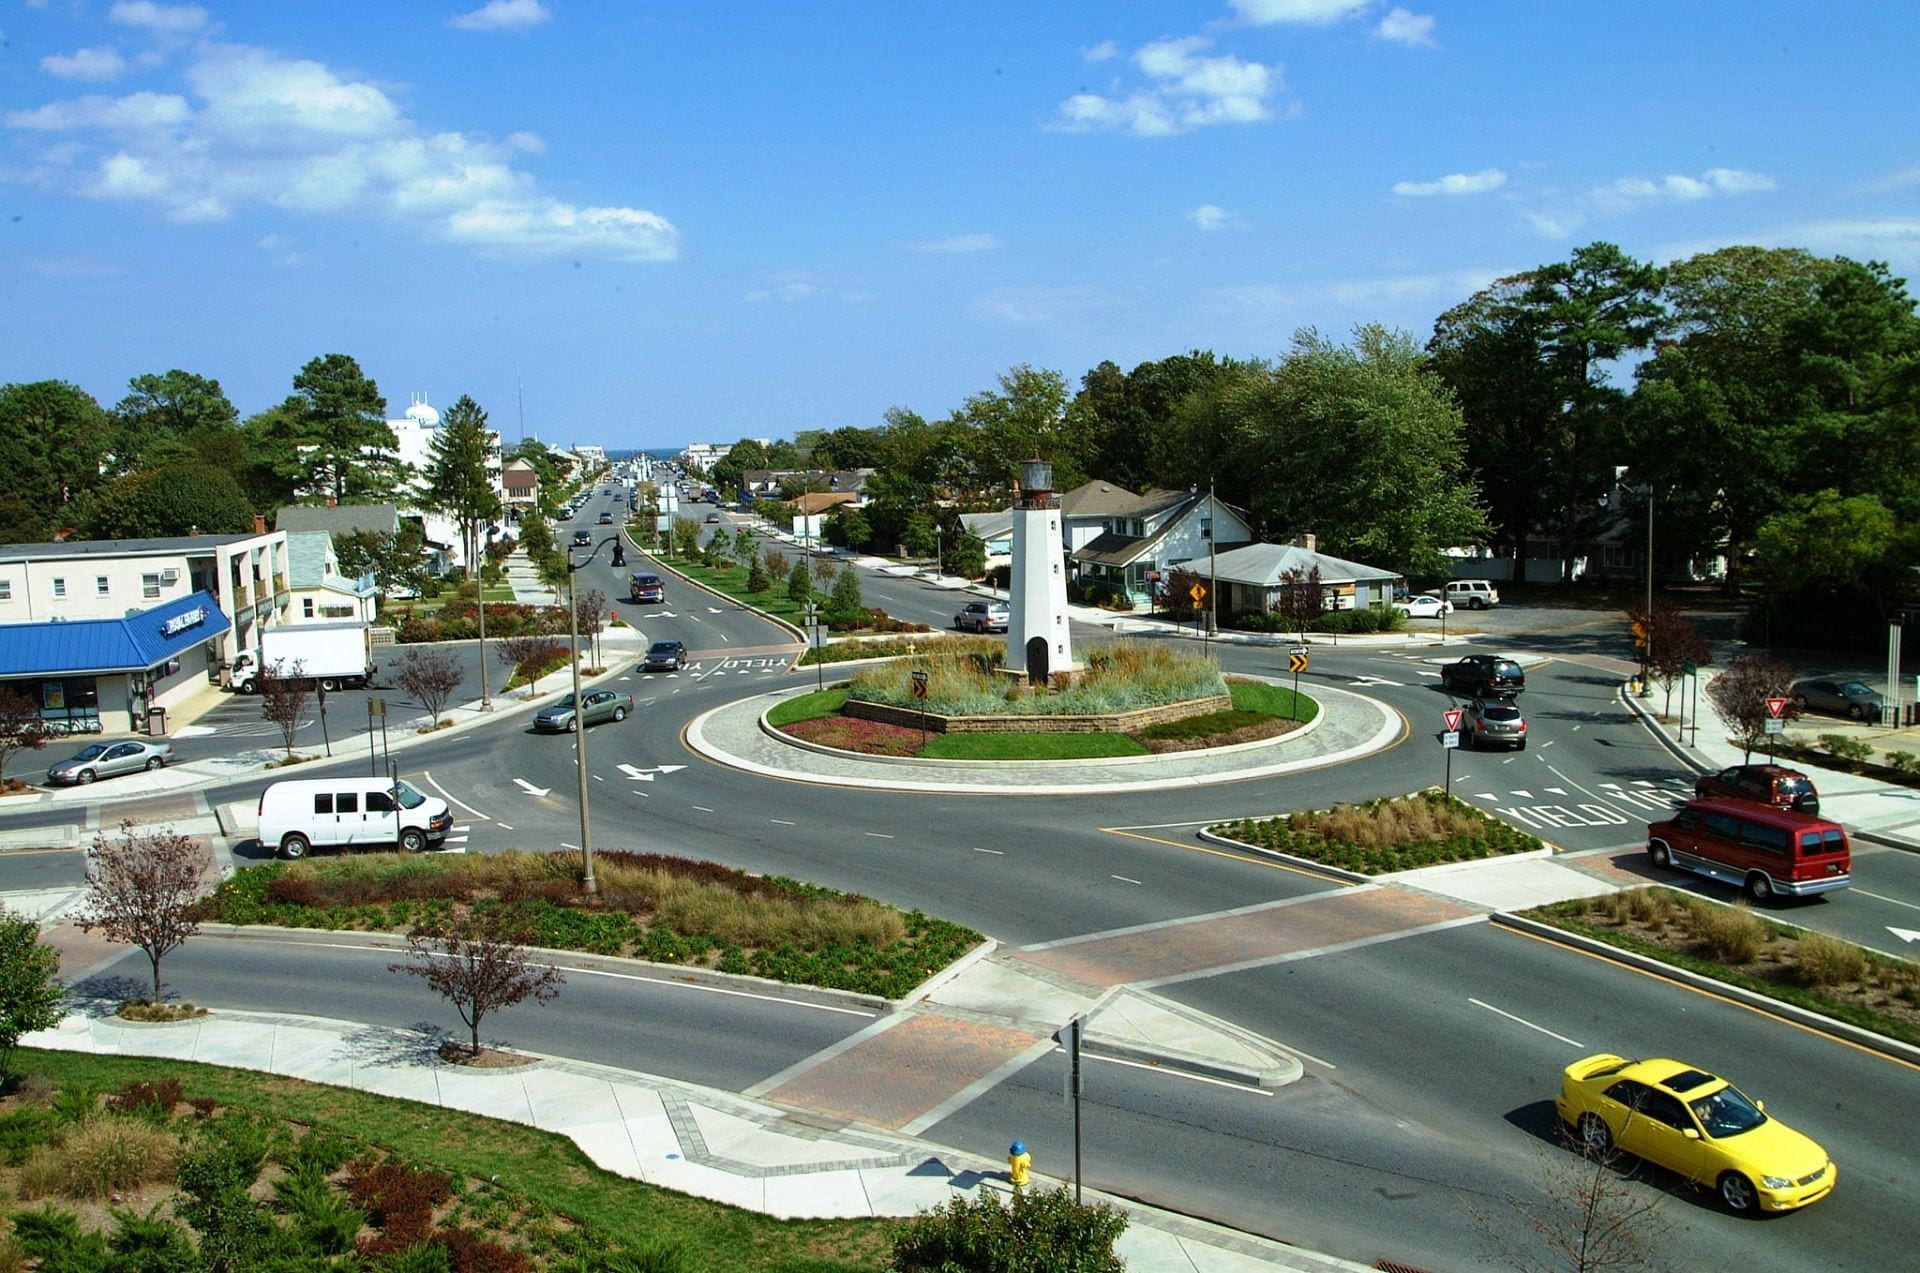 Aerial view of traffic circle in Lewes, Delaware